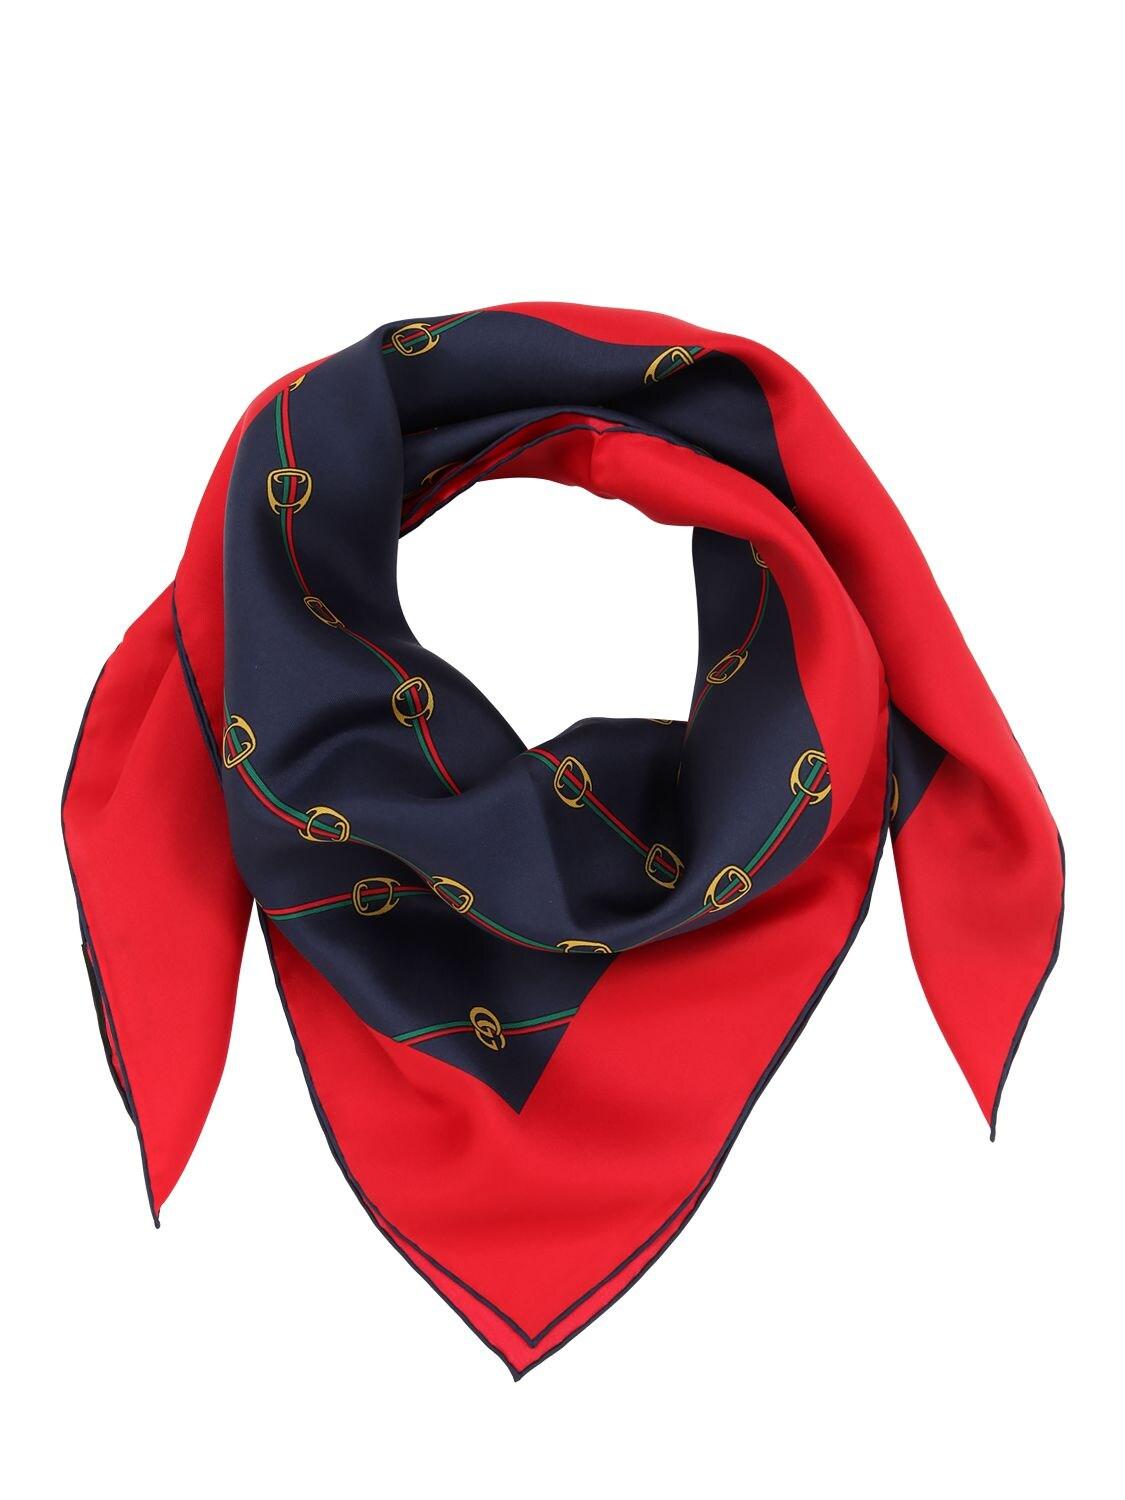 Gucci Connection Print Silk Twill Scarf in Blue for Men - Lyst